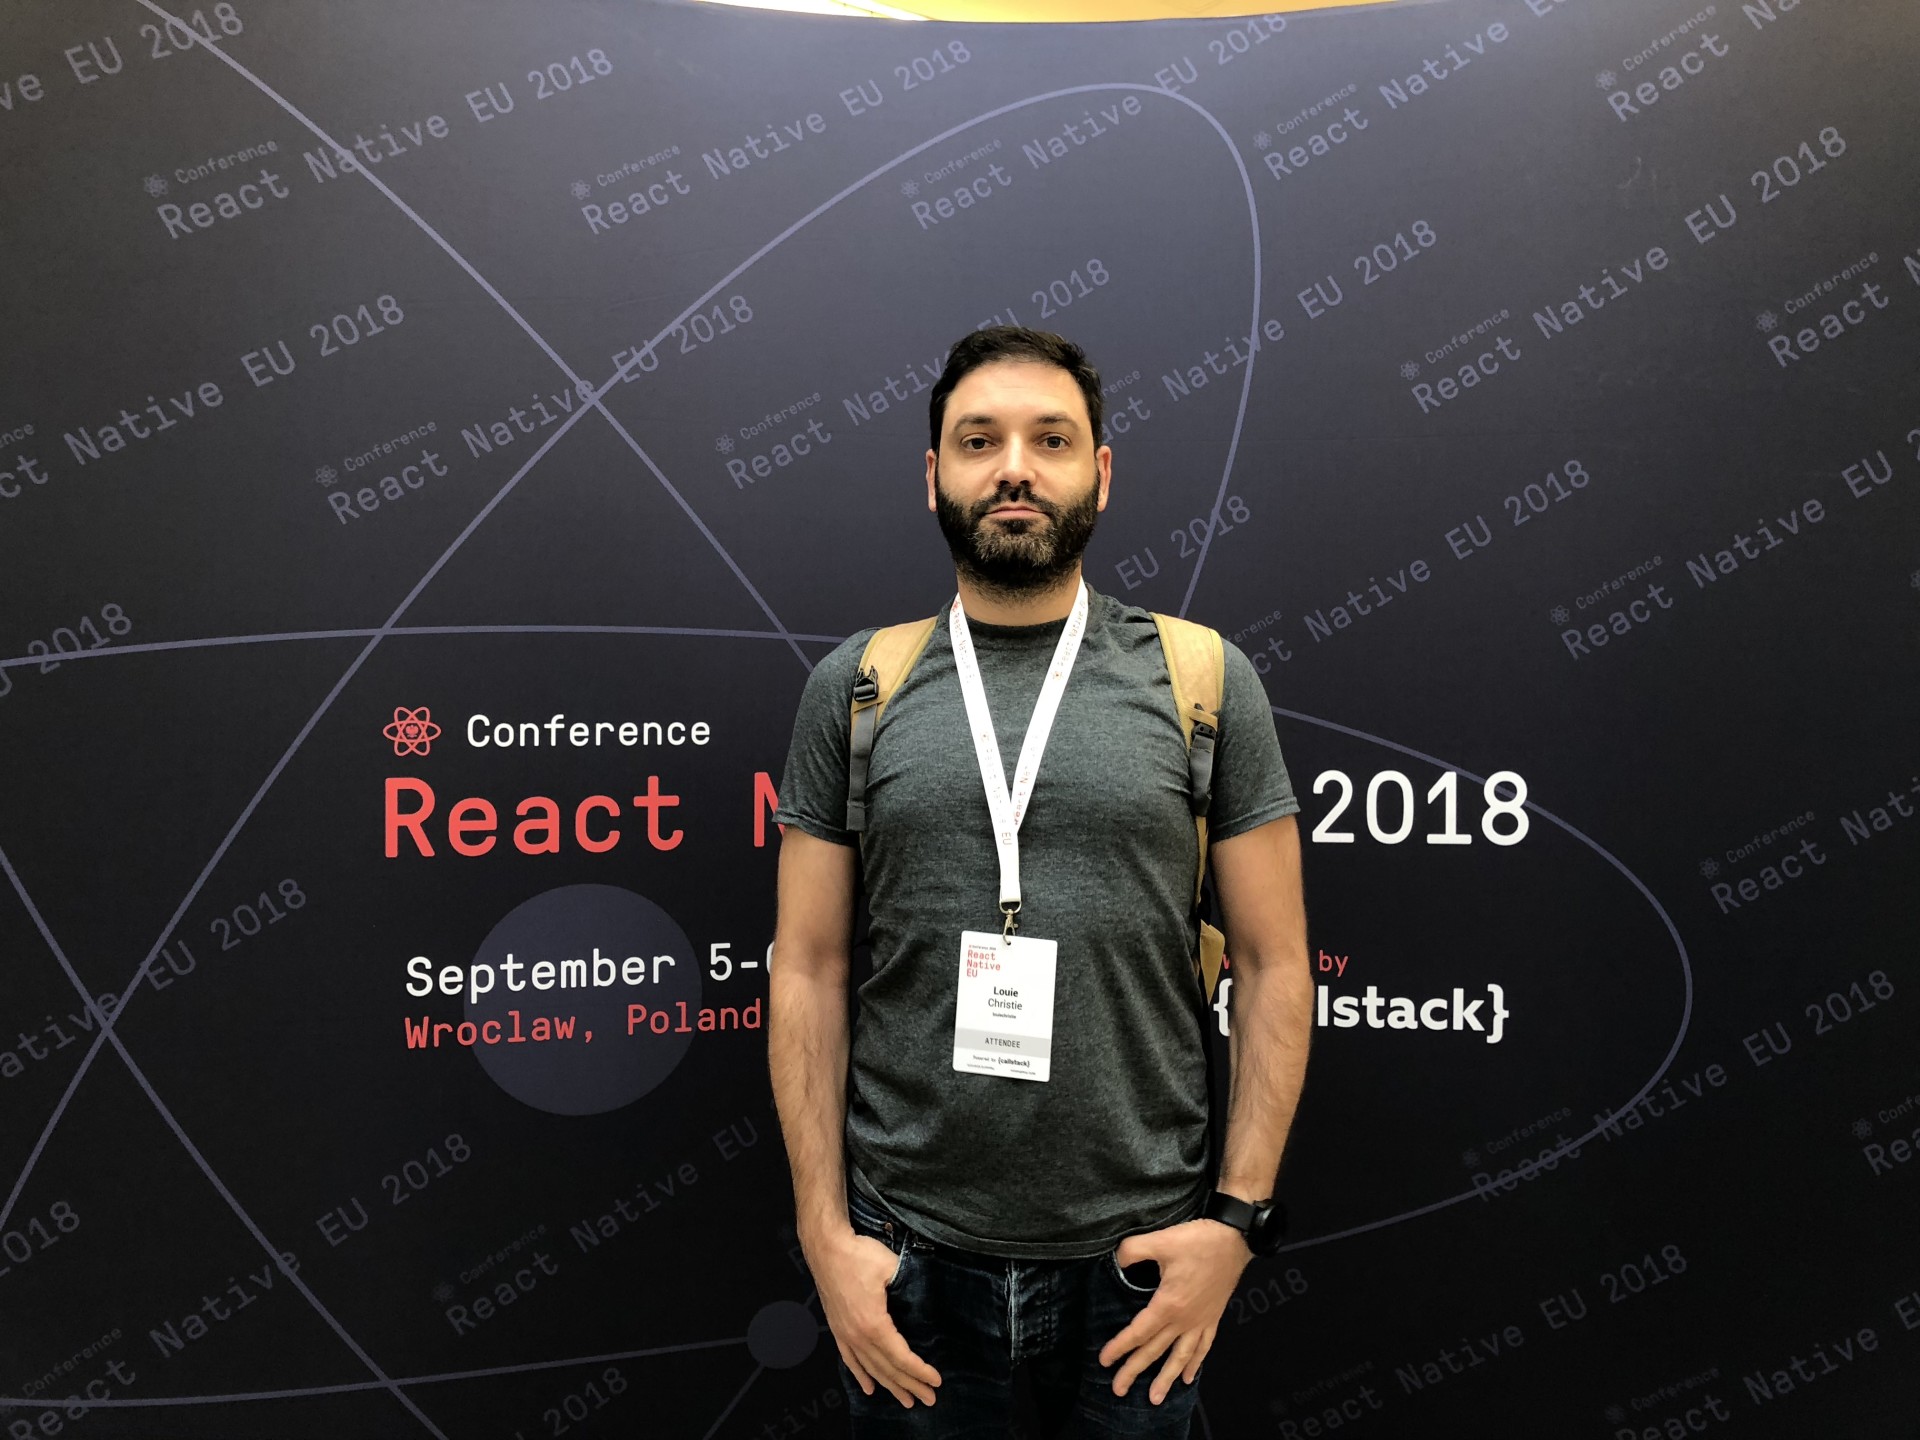 Louie Christie at React Native conference photo 2018